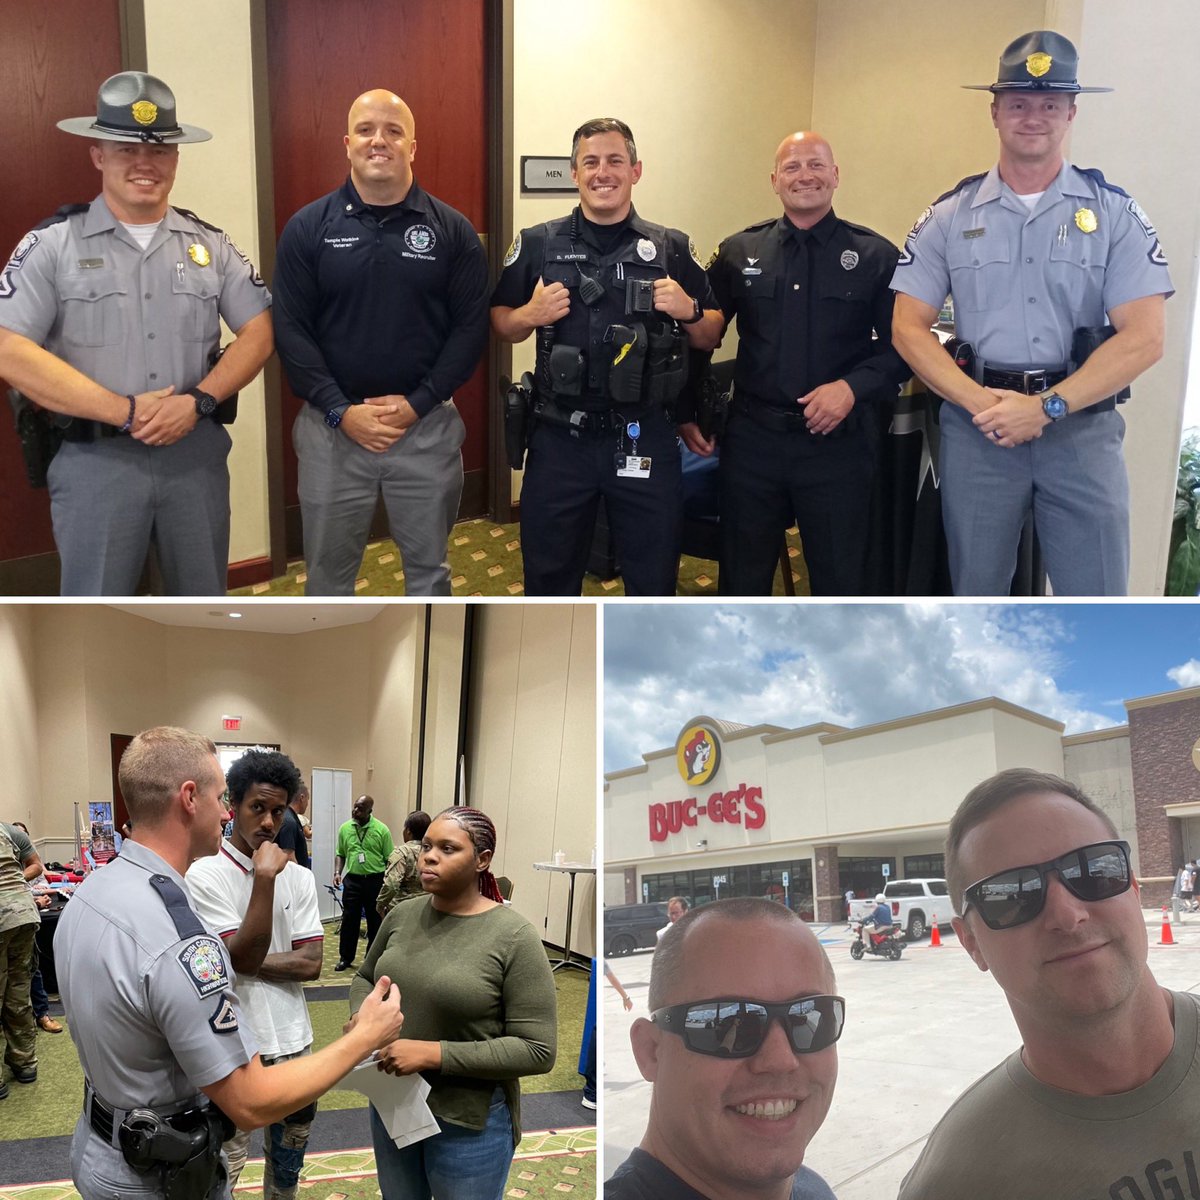 JoinSCHP.com 
Thank you Ft. Campbell for having us at your career fair. The people of Tennessee and Kentucky were super welcoming and very appreciative of law enforcement. #schp #statetroopers #builtfordtough #chevytahoe #scdps #targetzero #clickitdontriskit